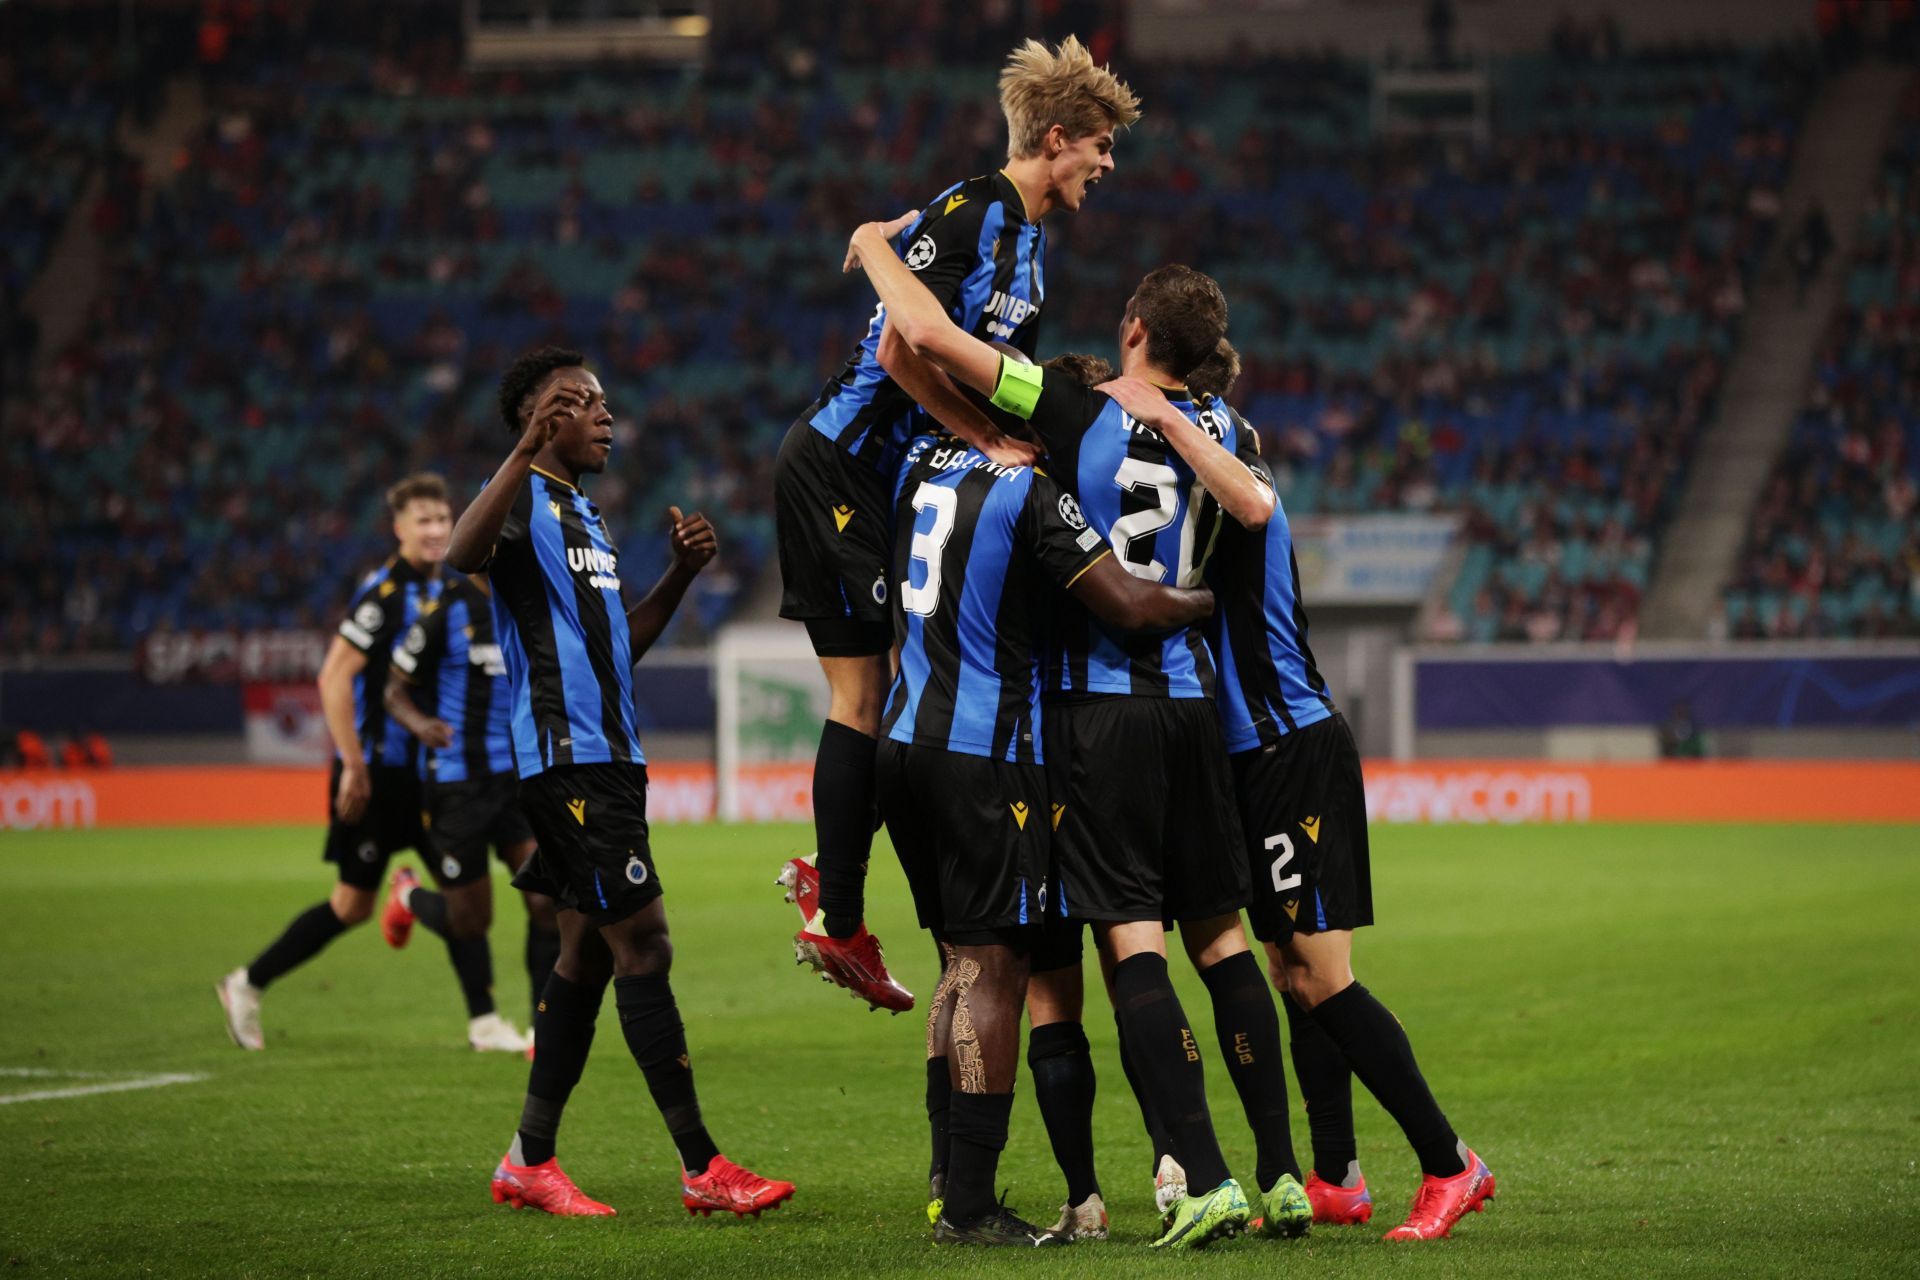 Club Brugge have a point to prove